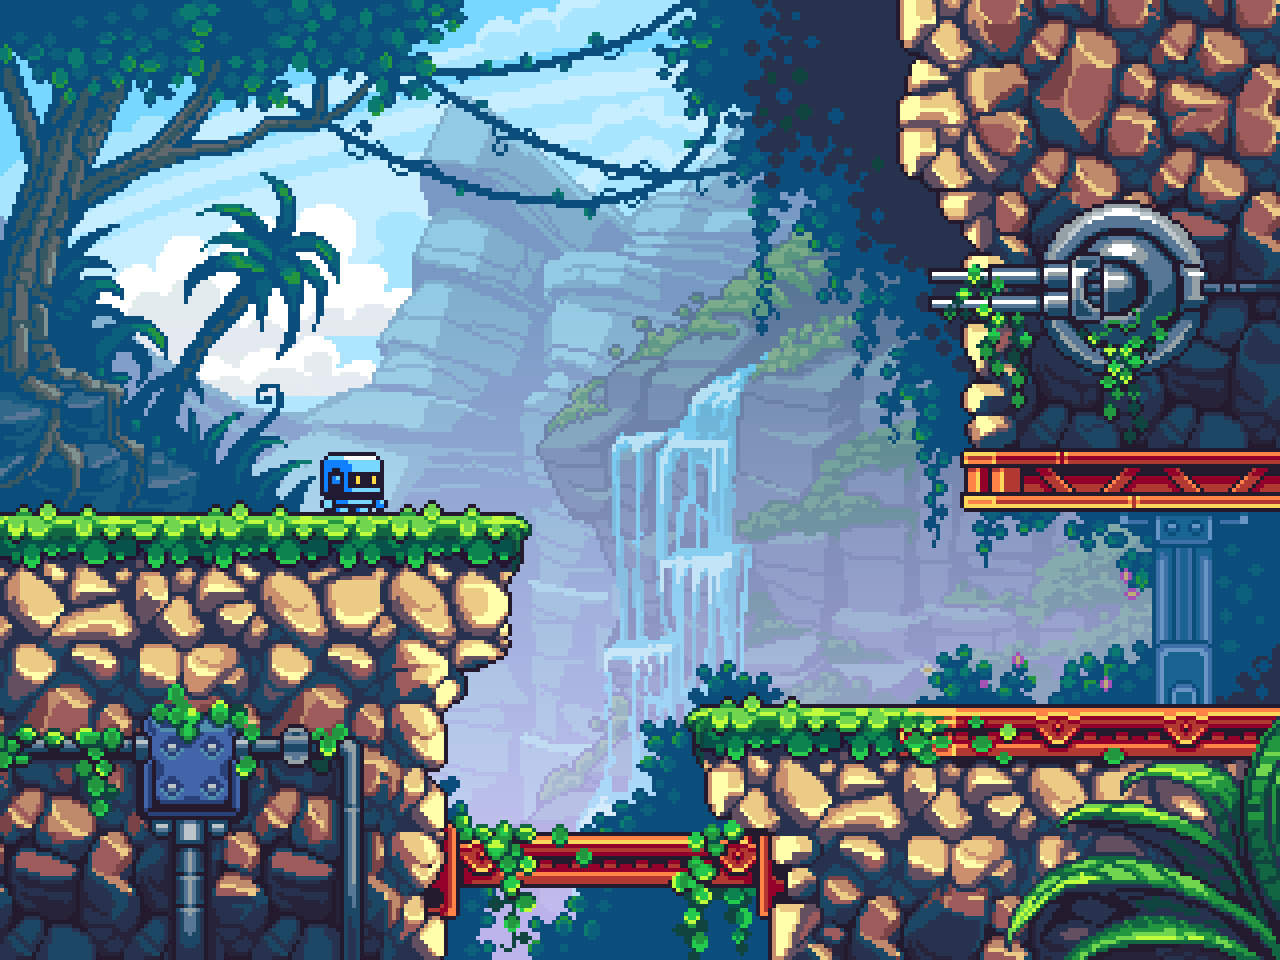 Jungle environment (And if you are brave enough, you can check the time-lapse video as well -> 10.5 hours shrunk to 10 minutes. A lot of pixel stones and leaves included :)